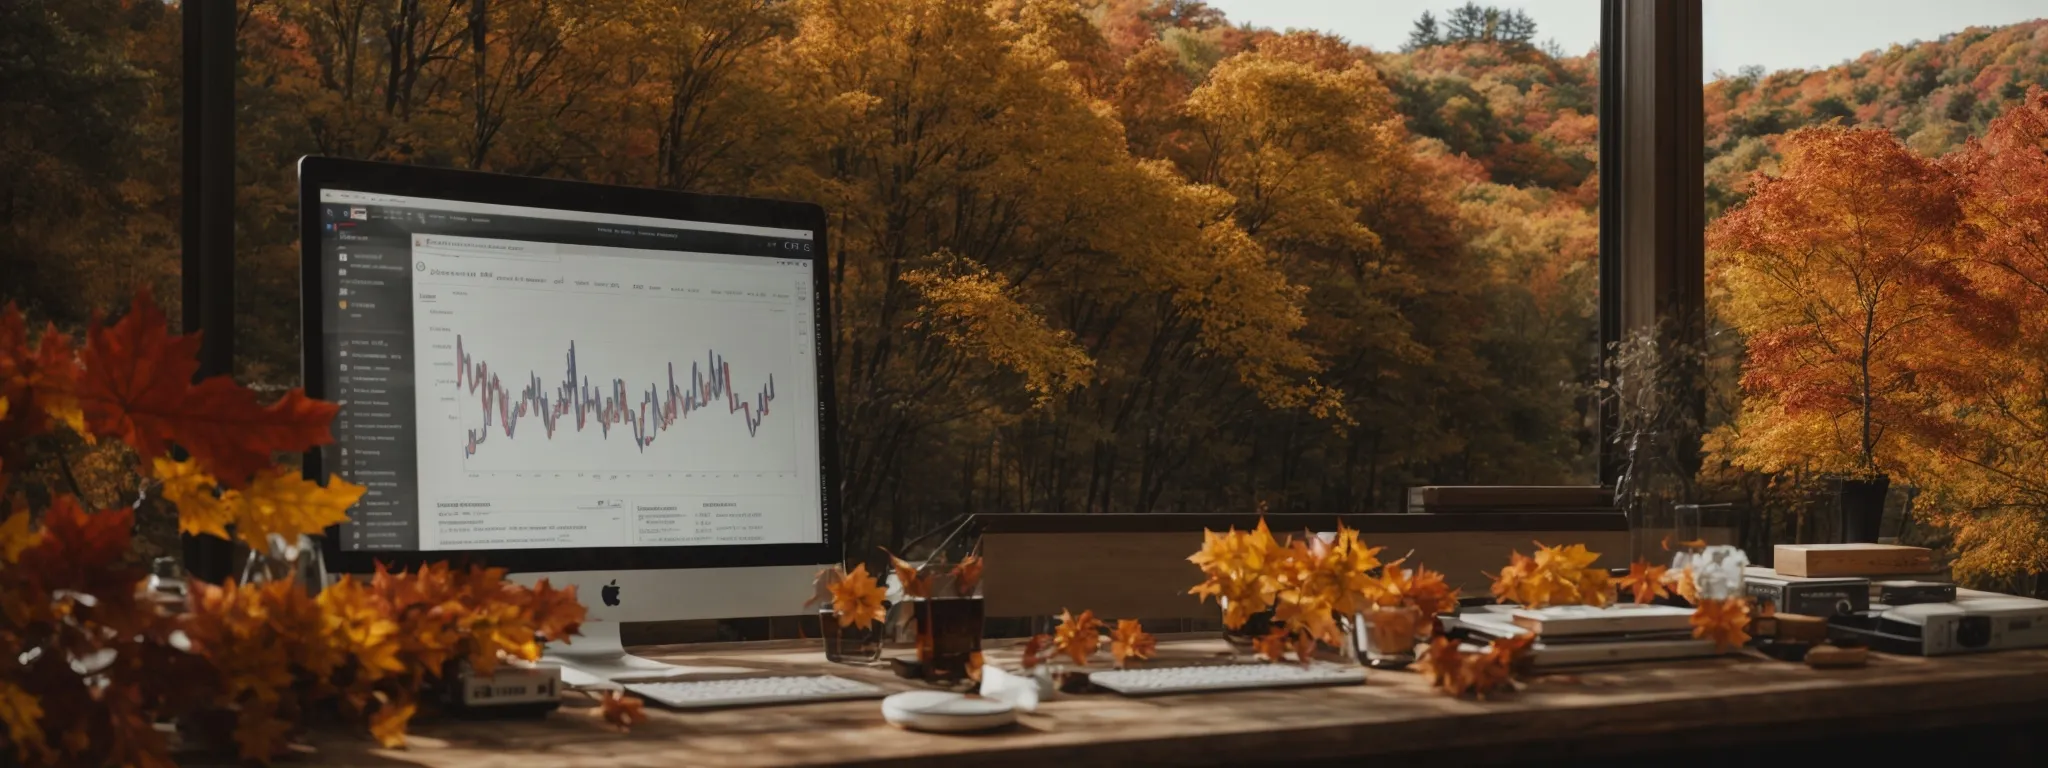 a scenic view of a desktop with a computer displaying a graph of website analytics amidst connecticut's autumn foliage.